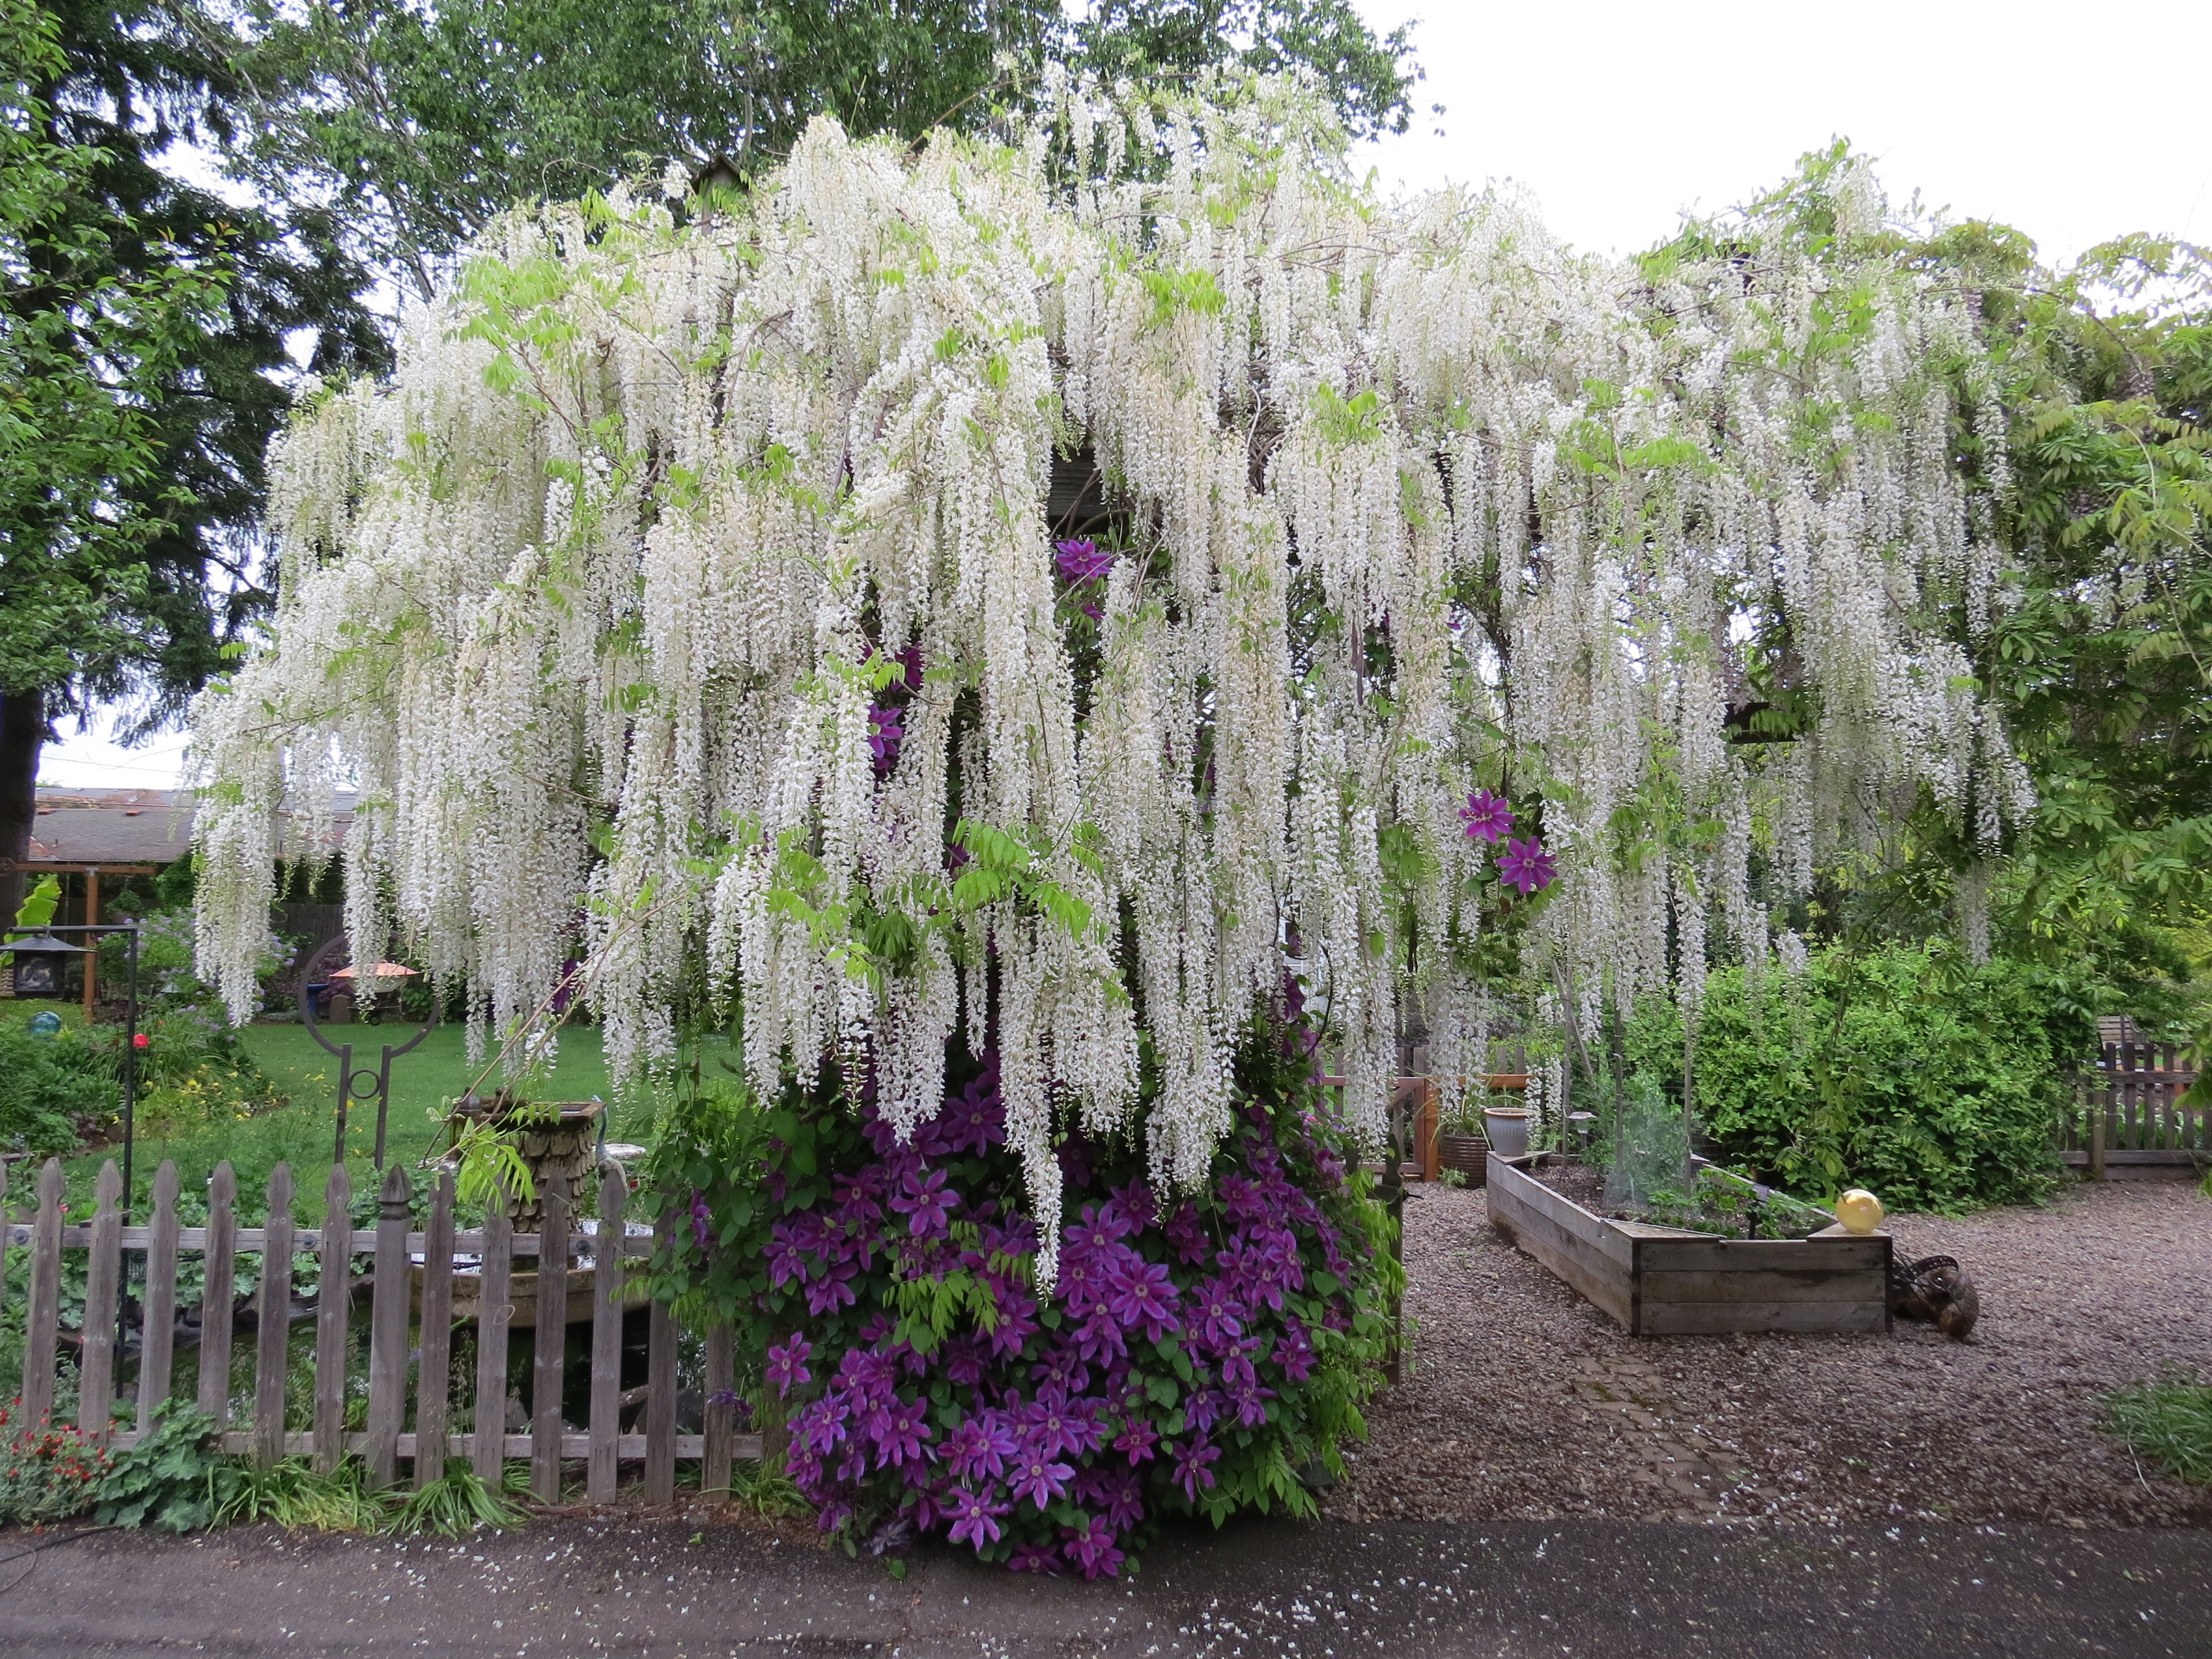 Wisteria care: Get out your clippers twice a year and go to town